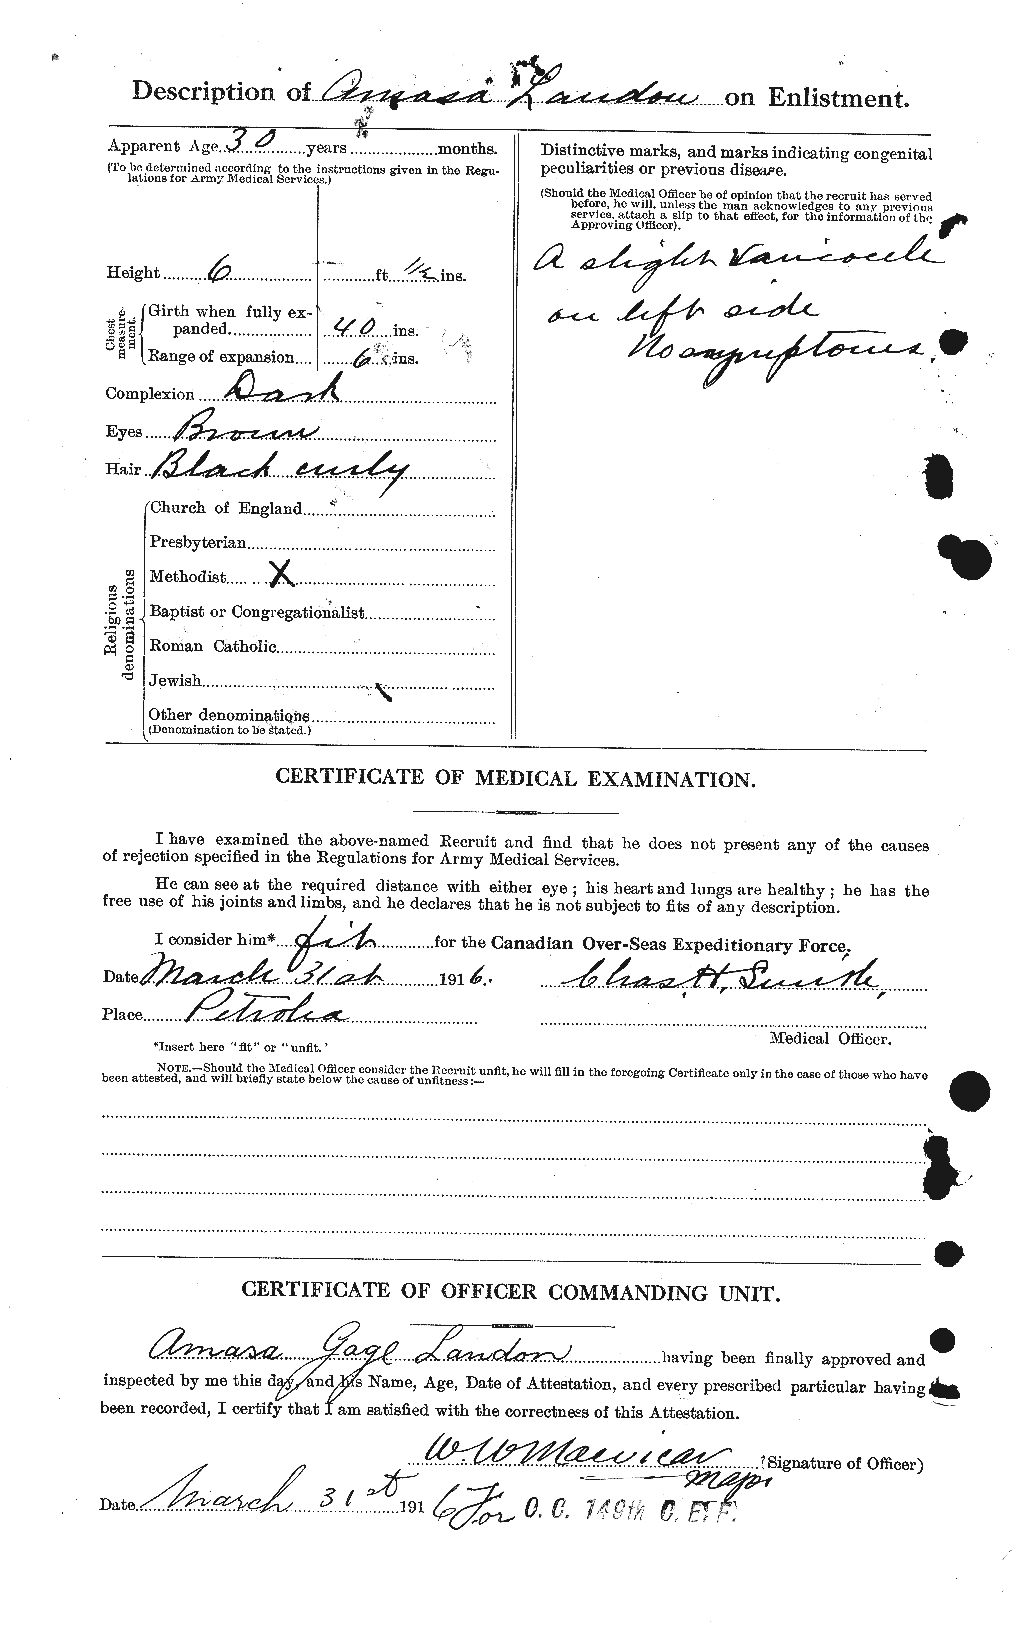 Personnel Records of the First World War - CEF 445630b